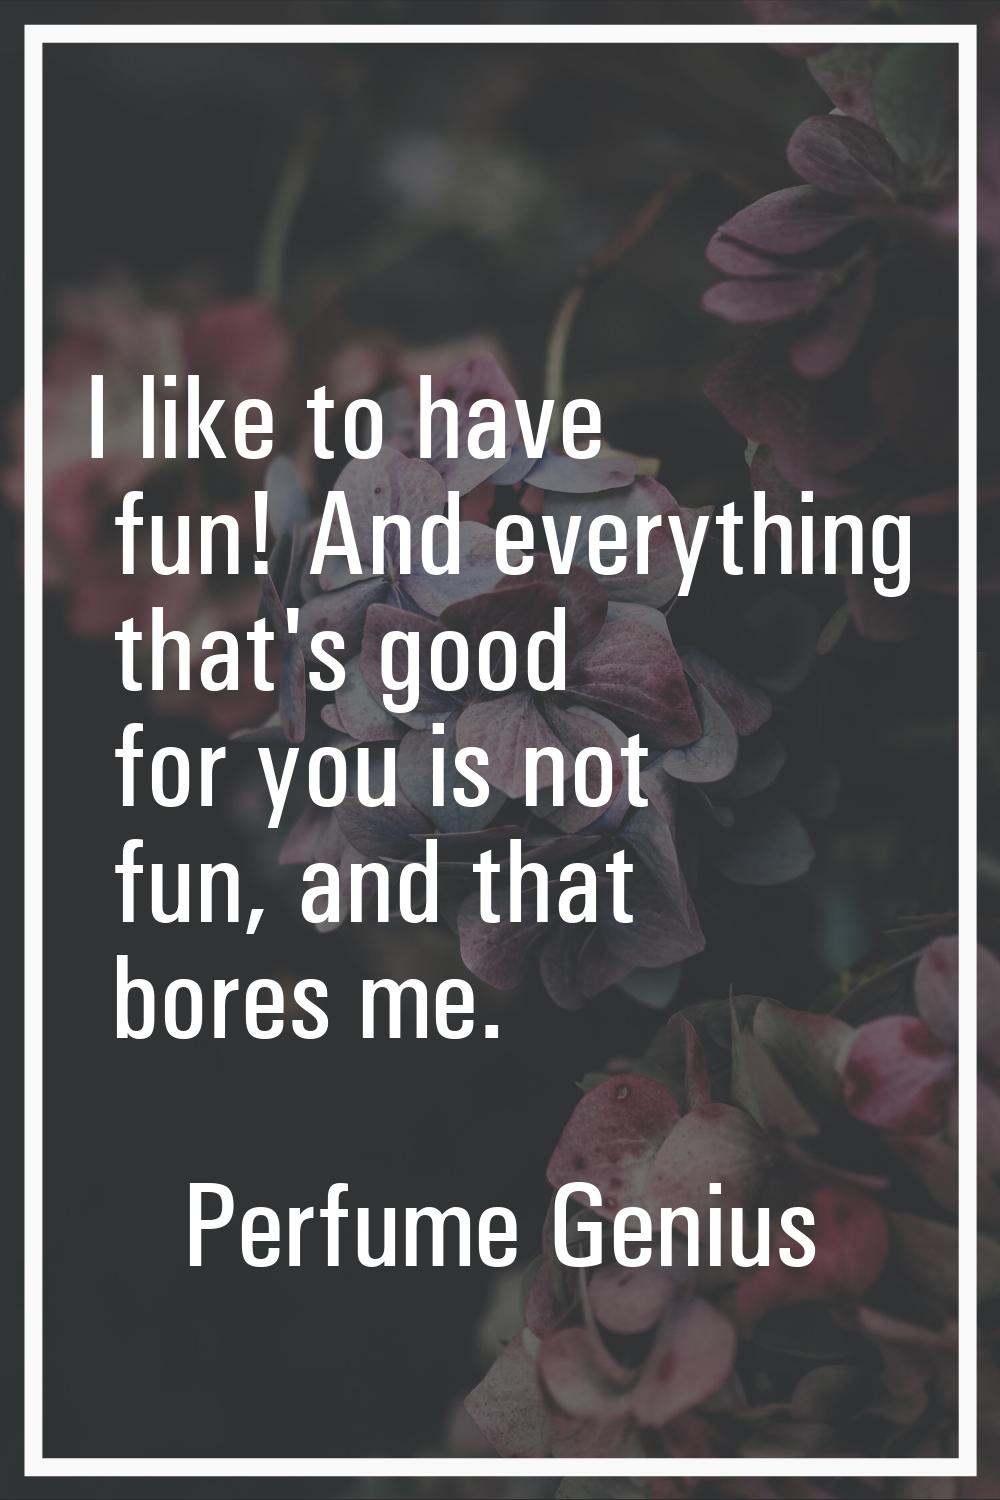 I like to have fun! And everything that's good for you is not fun, and that bores me.